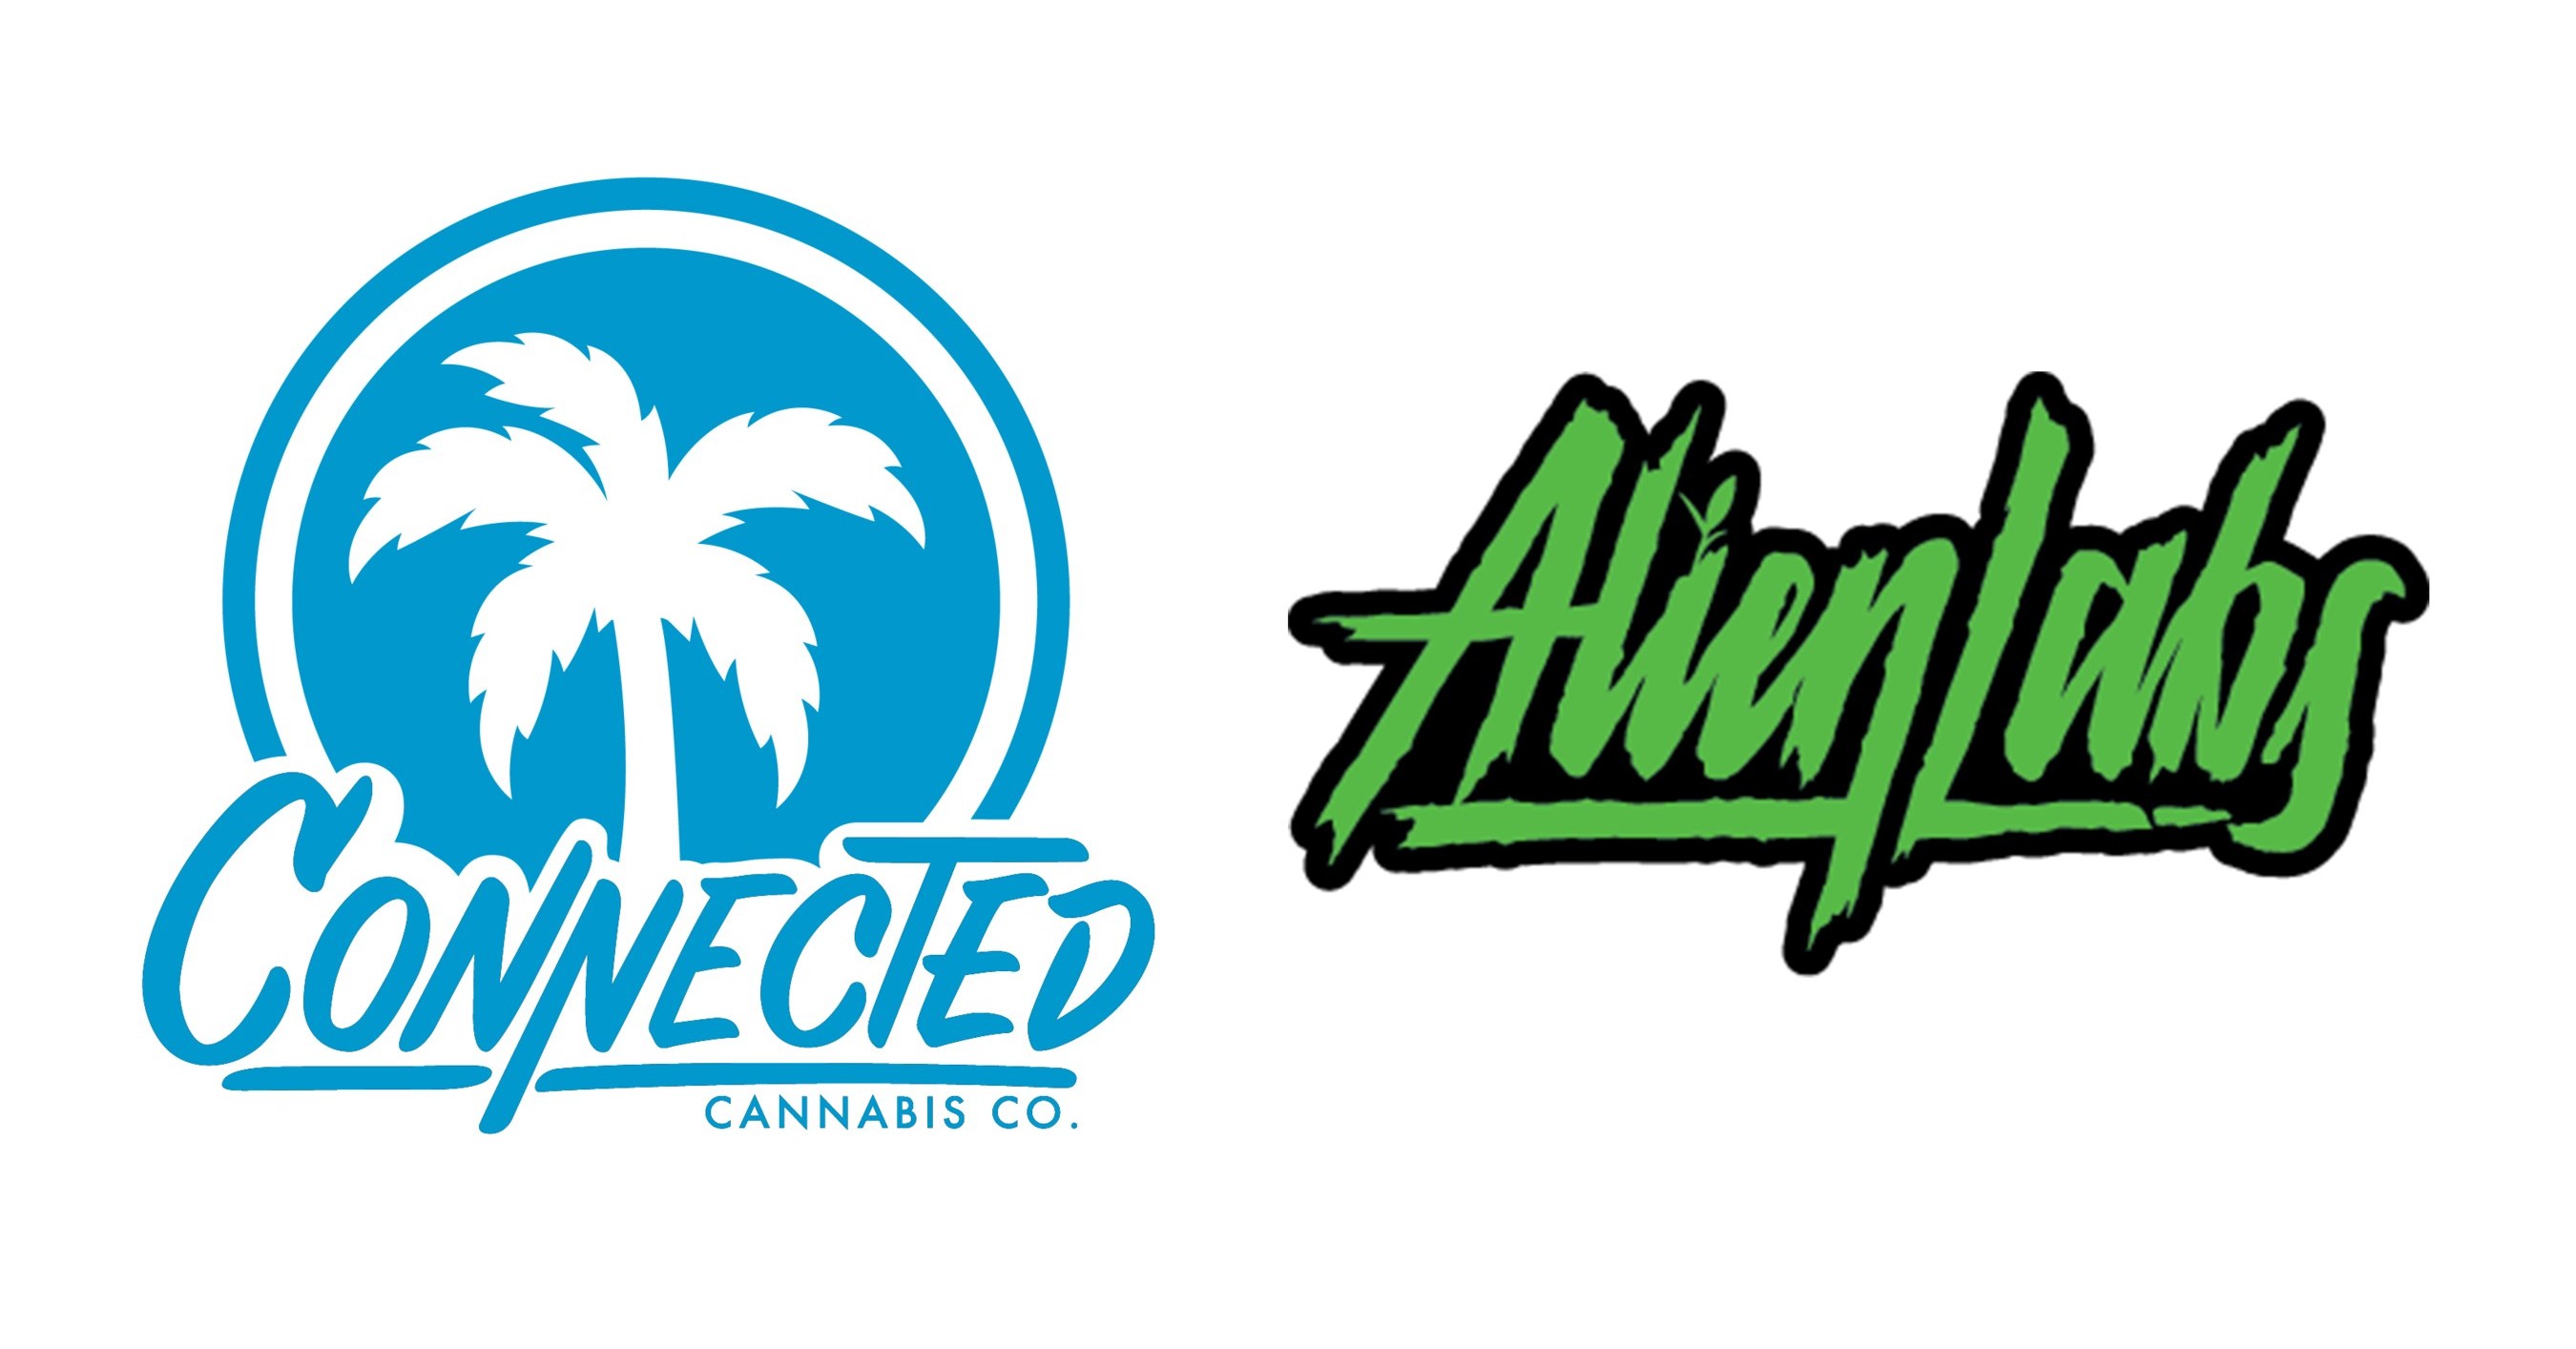 TRULIEVE ANNOUNCES EXCLUSIVE PARTNERSHIP IN FLORIDA WITH CONNECTED CANNABIS &AMP; ALIENLABS - DEC 15, 2022